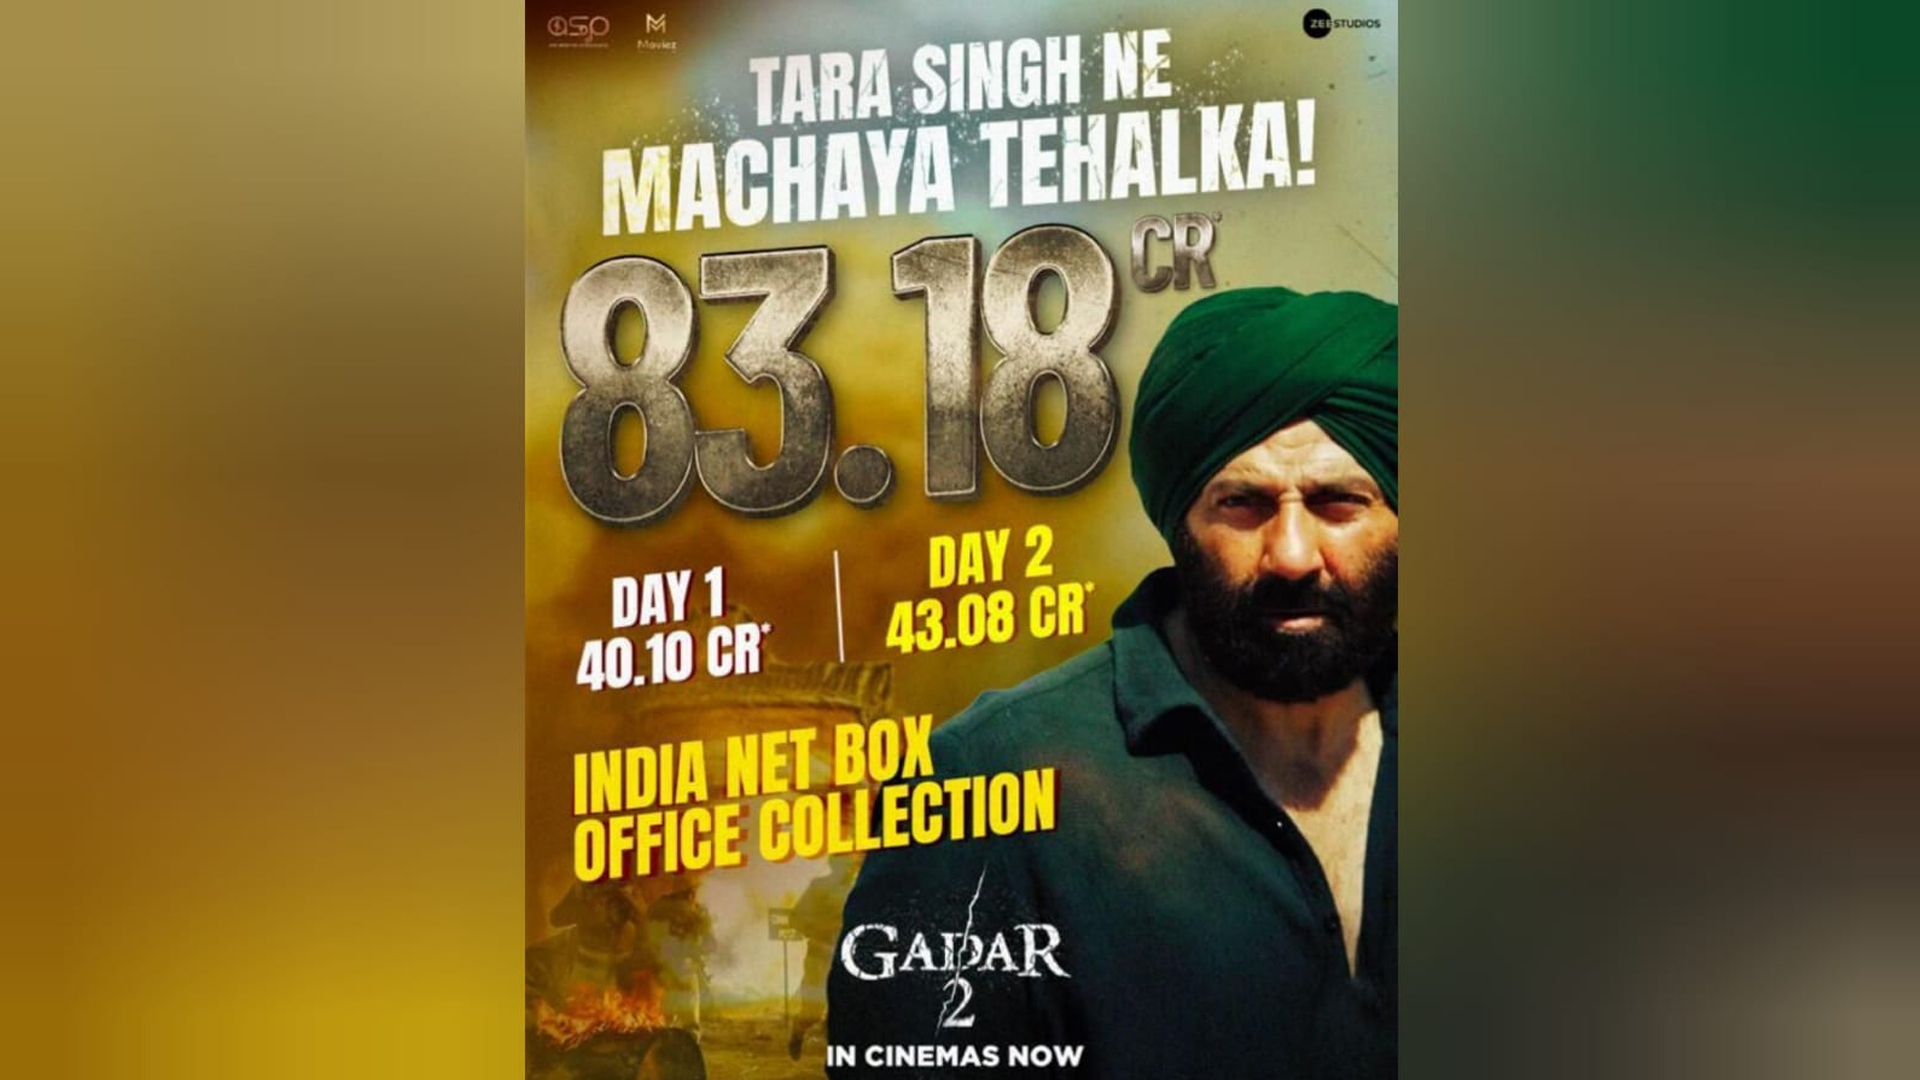 Sunny Deol’s Gadar 2 is unstoppable, mints Rs 43.08 crores on day 2